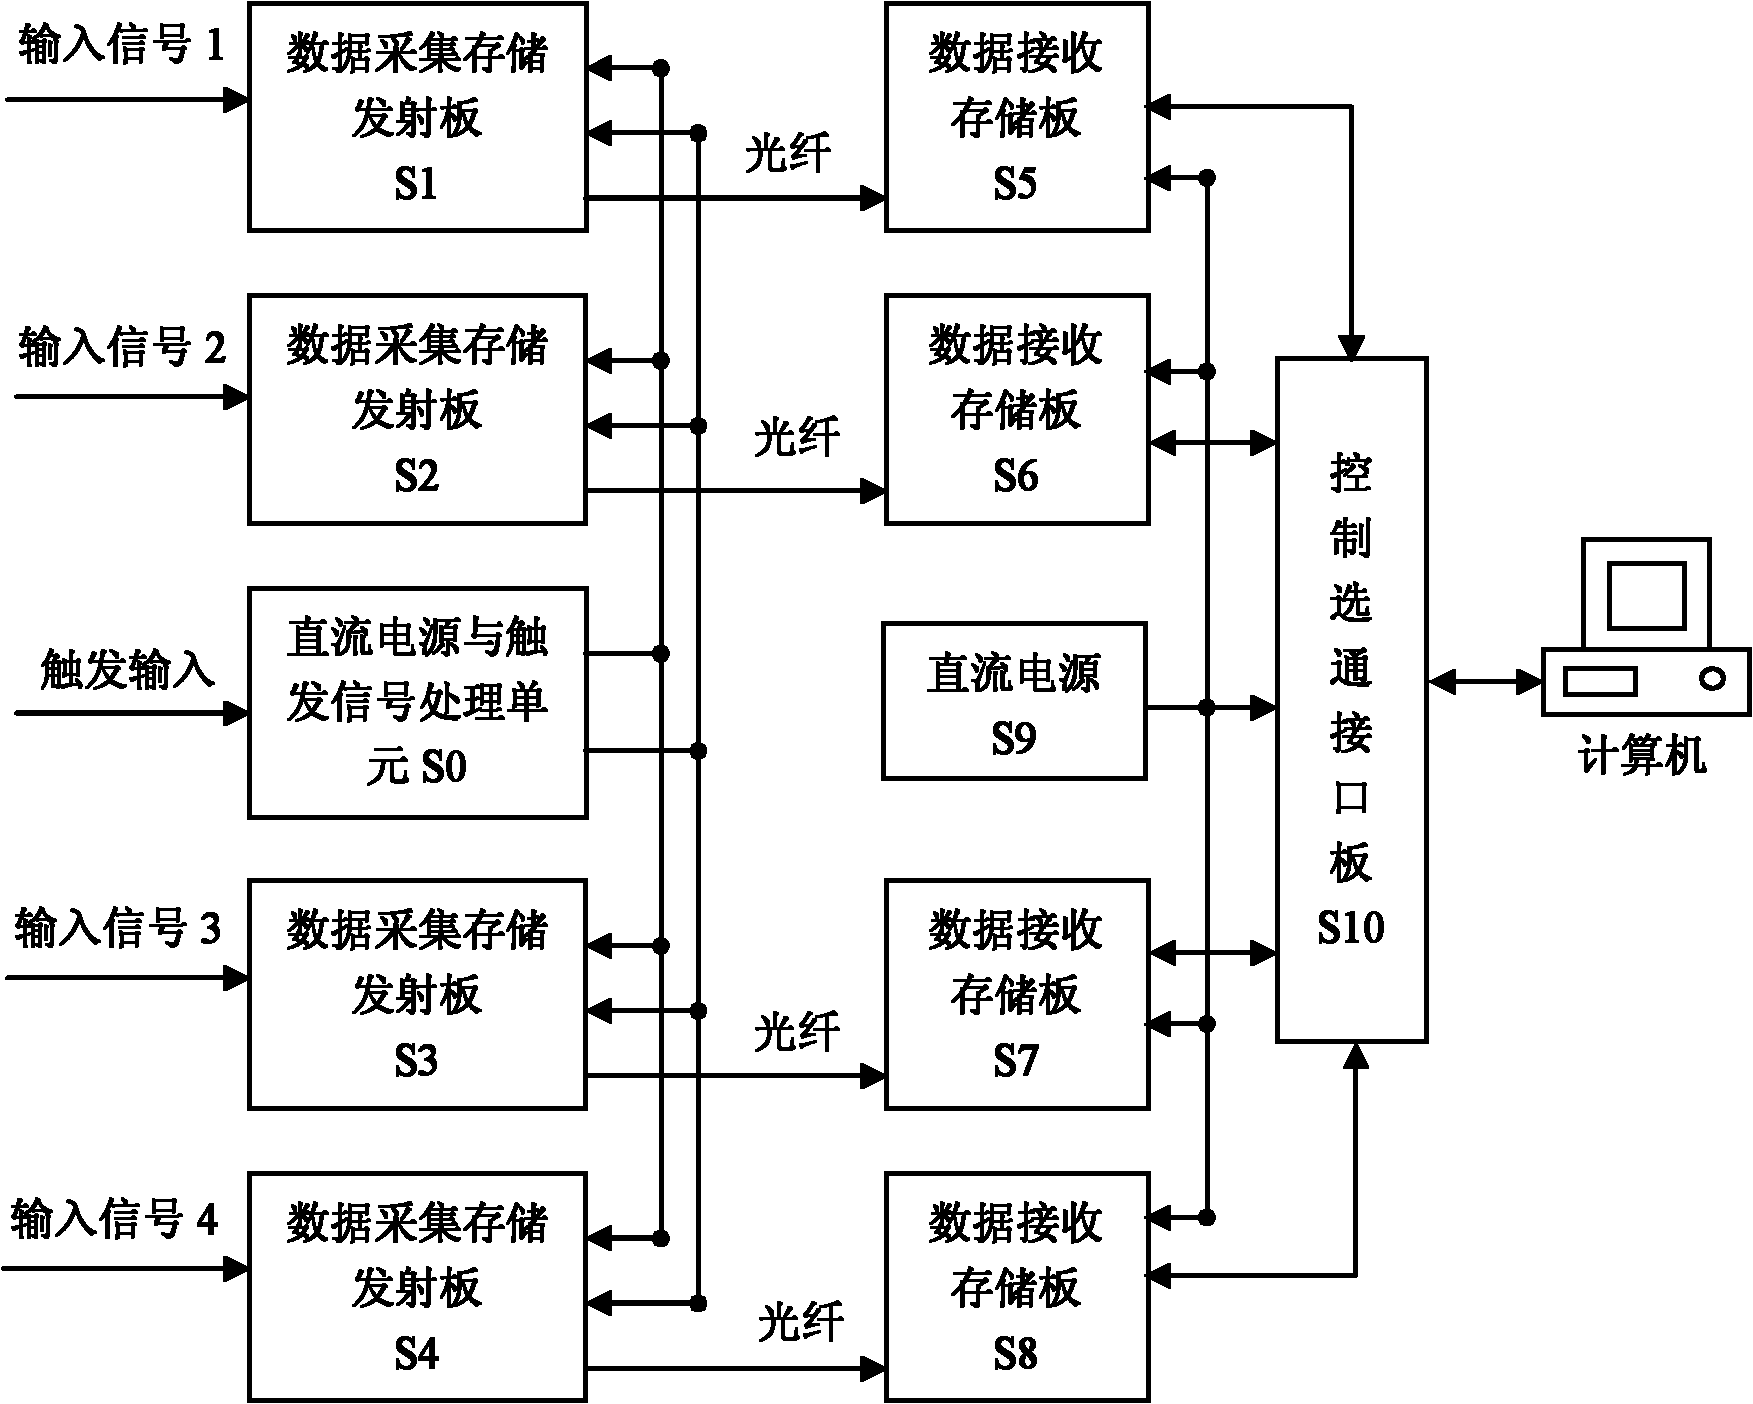 Multipath pulse signal acquisition device for use in radiation detection